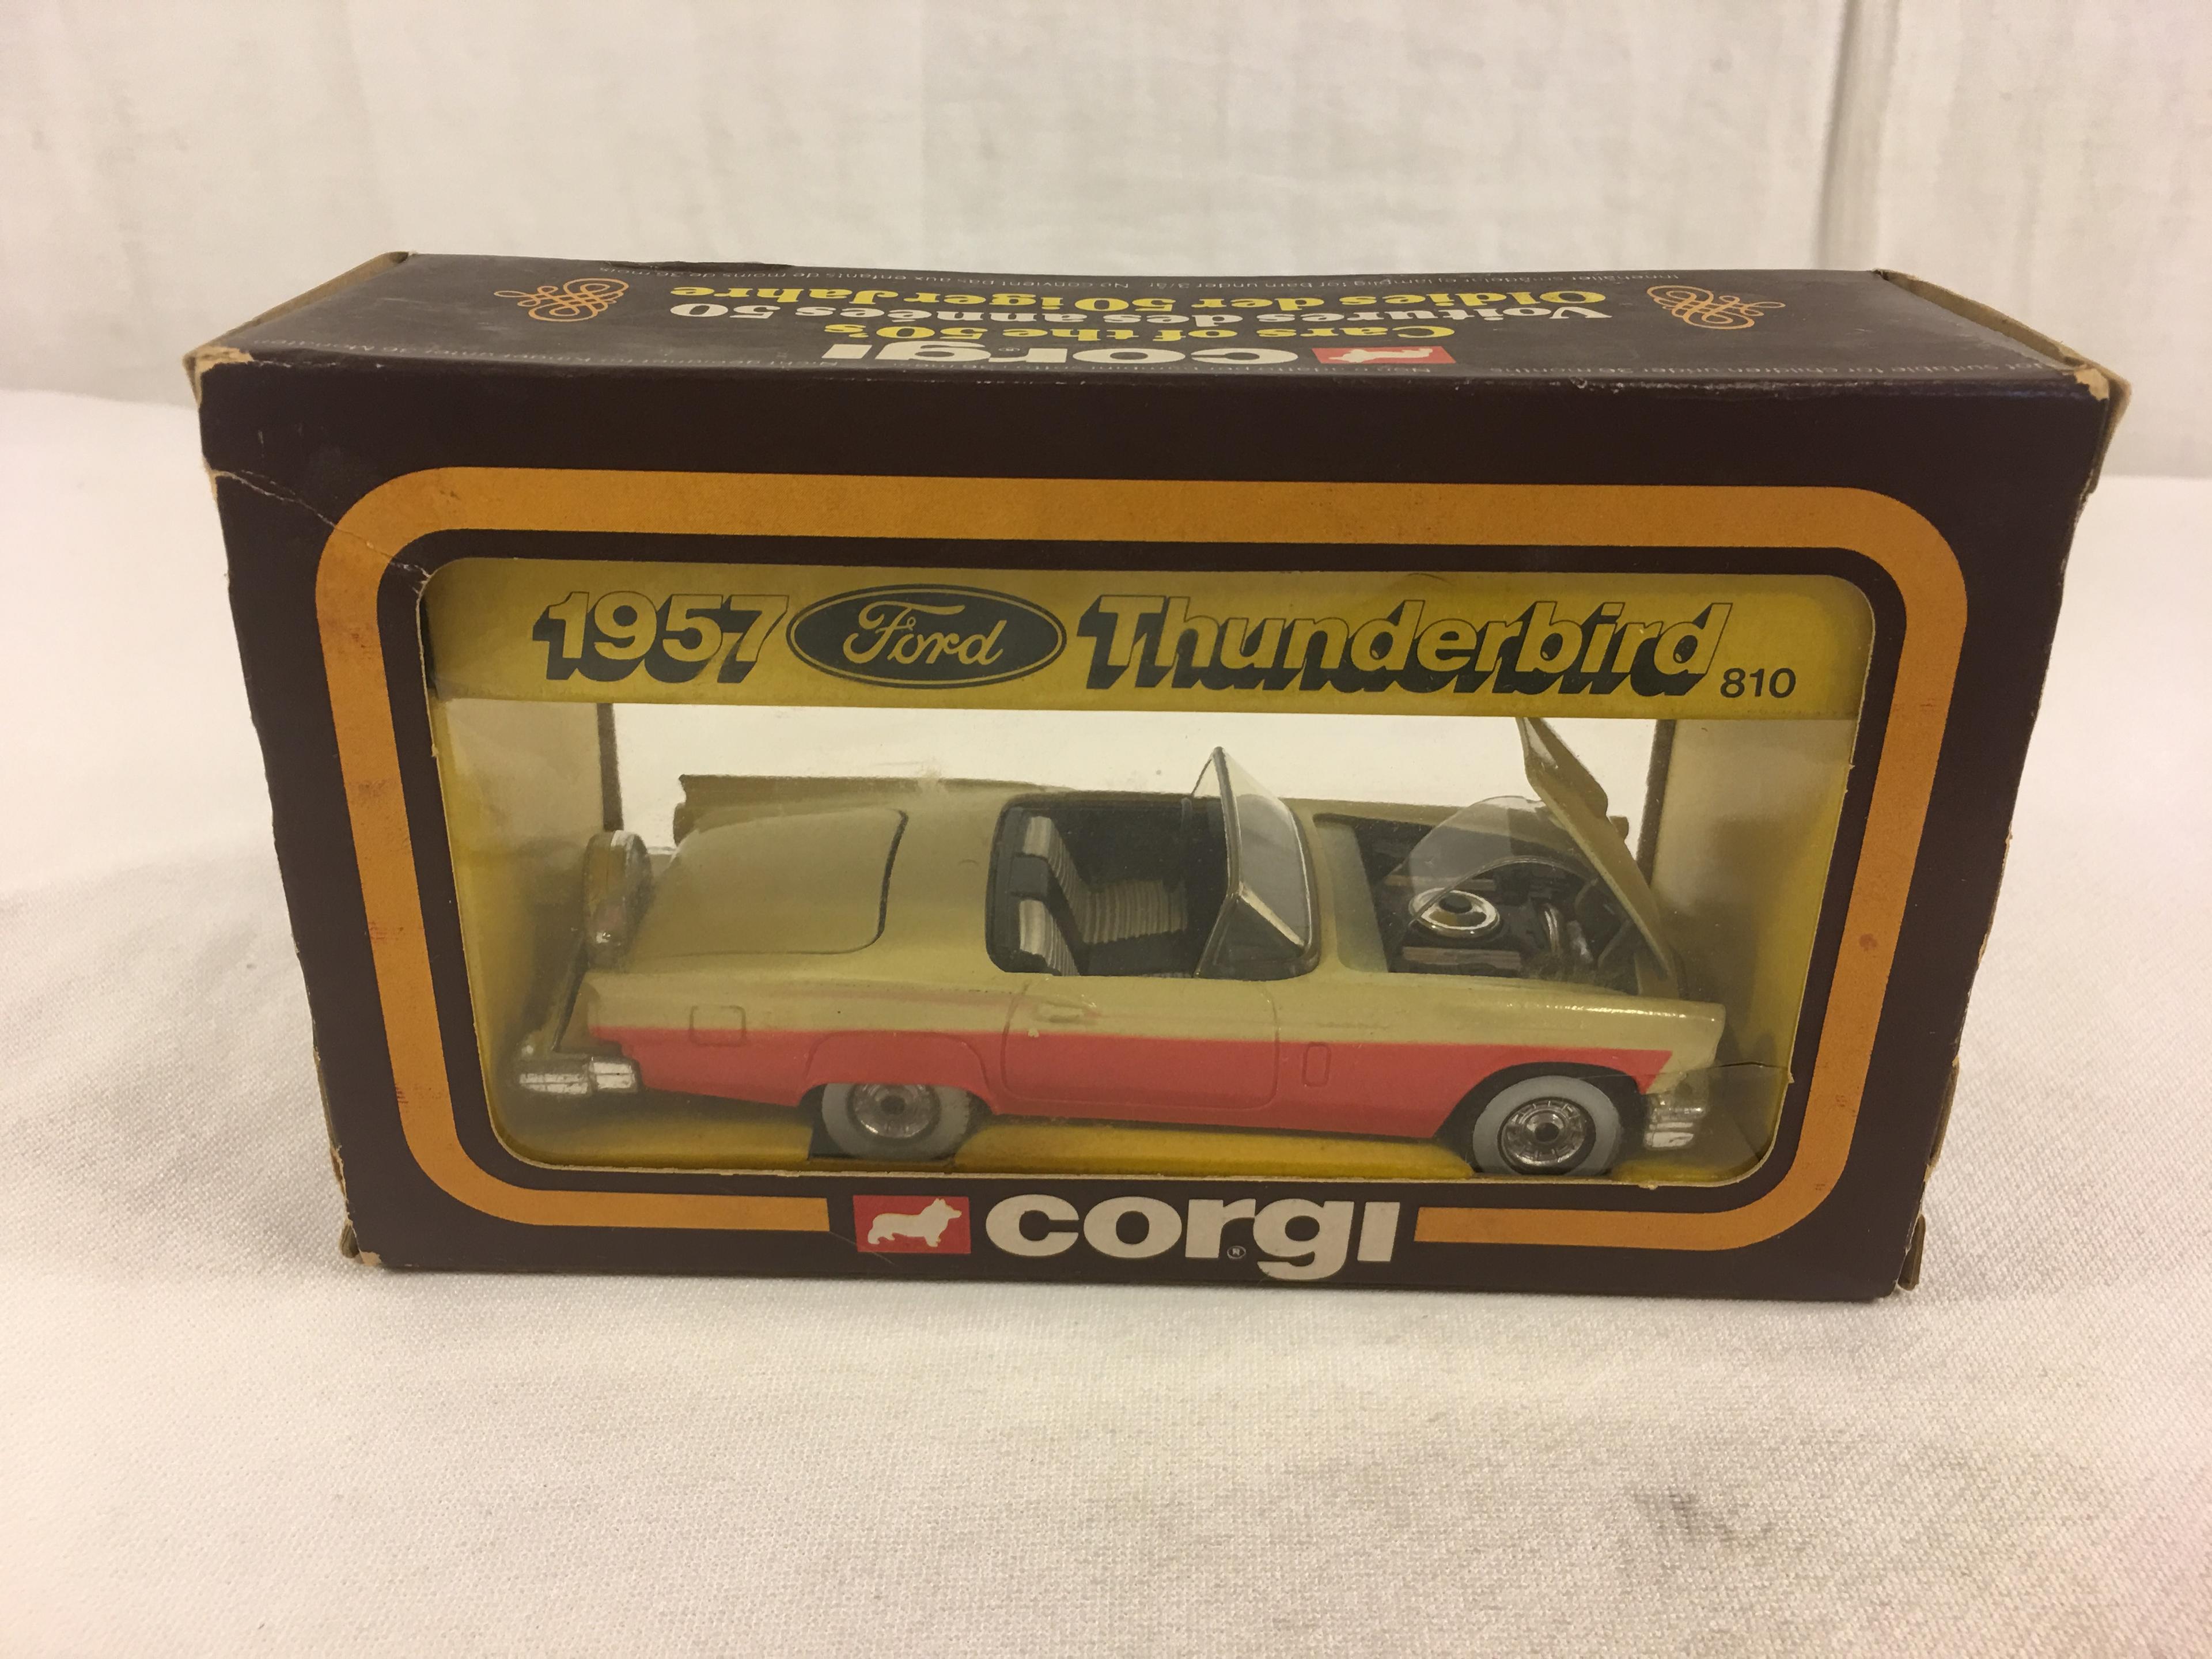 Collector Vintage Corgi Cars Of The 50' 1957 Ford Thunderbird 810  Oldies Der 50 DieCast Metal Car